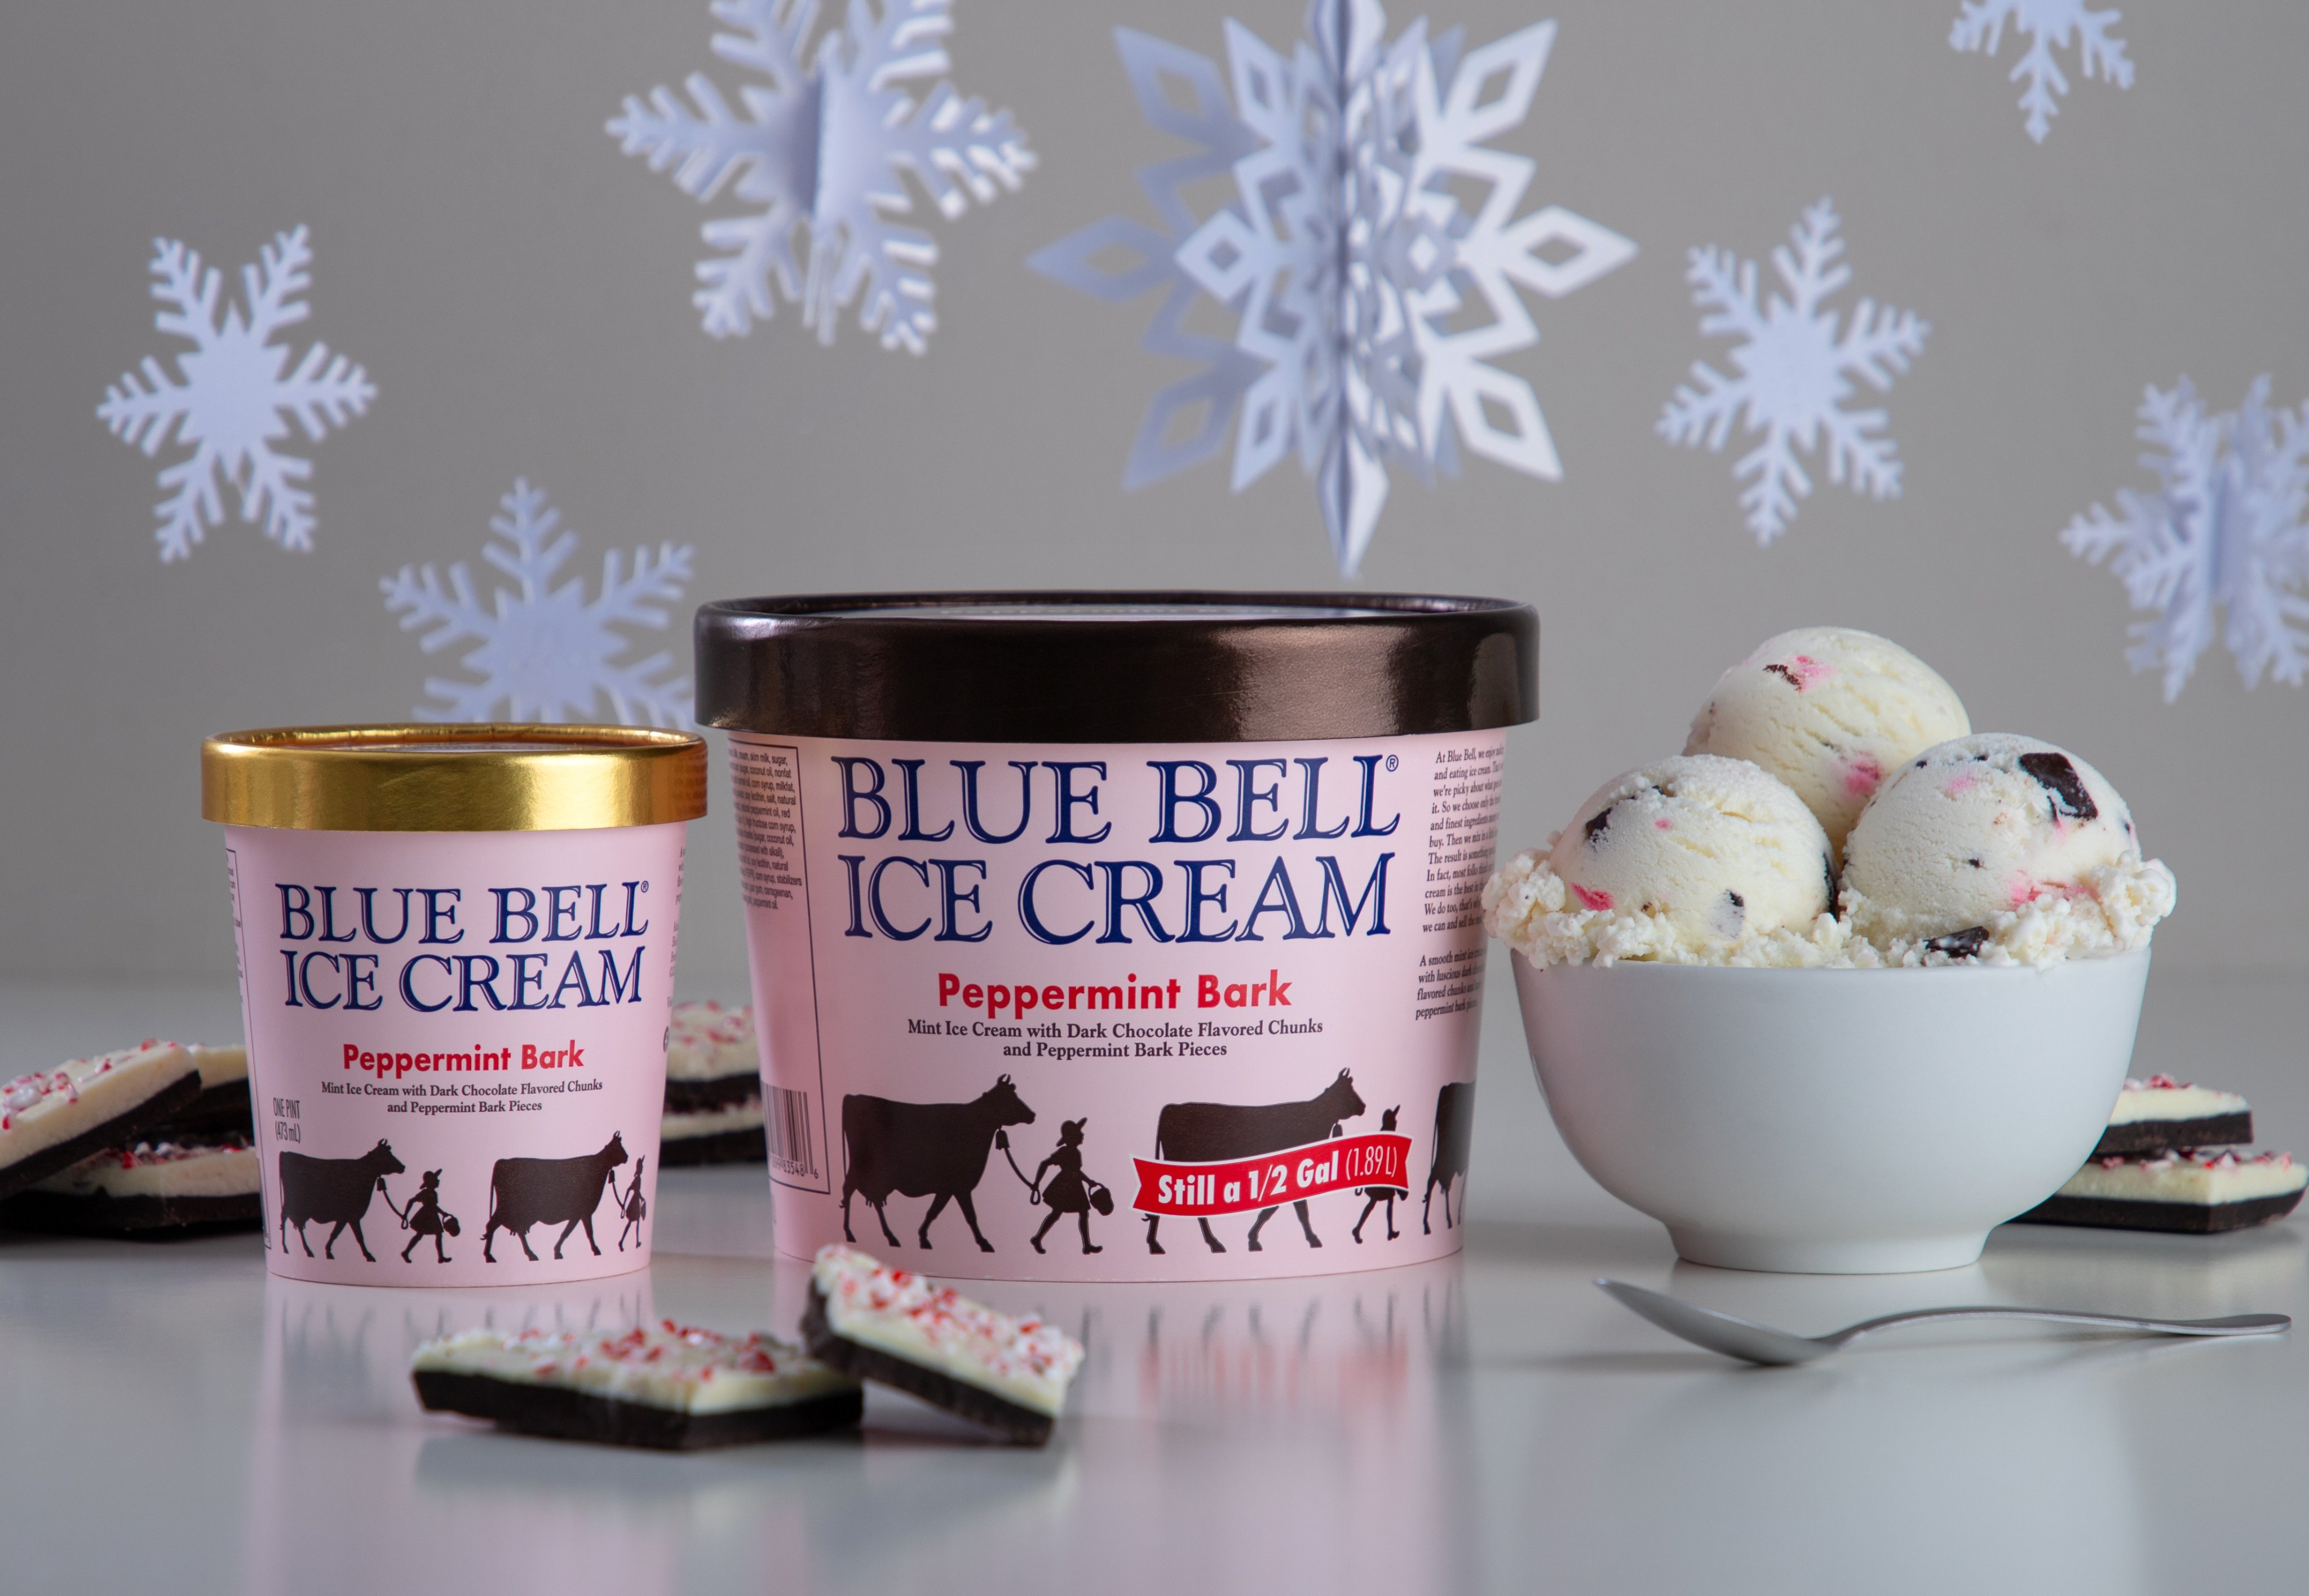 Blue Bell Ice Cream on X: Let the holiday fun begin! ❄️Our